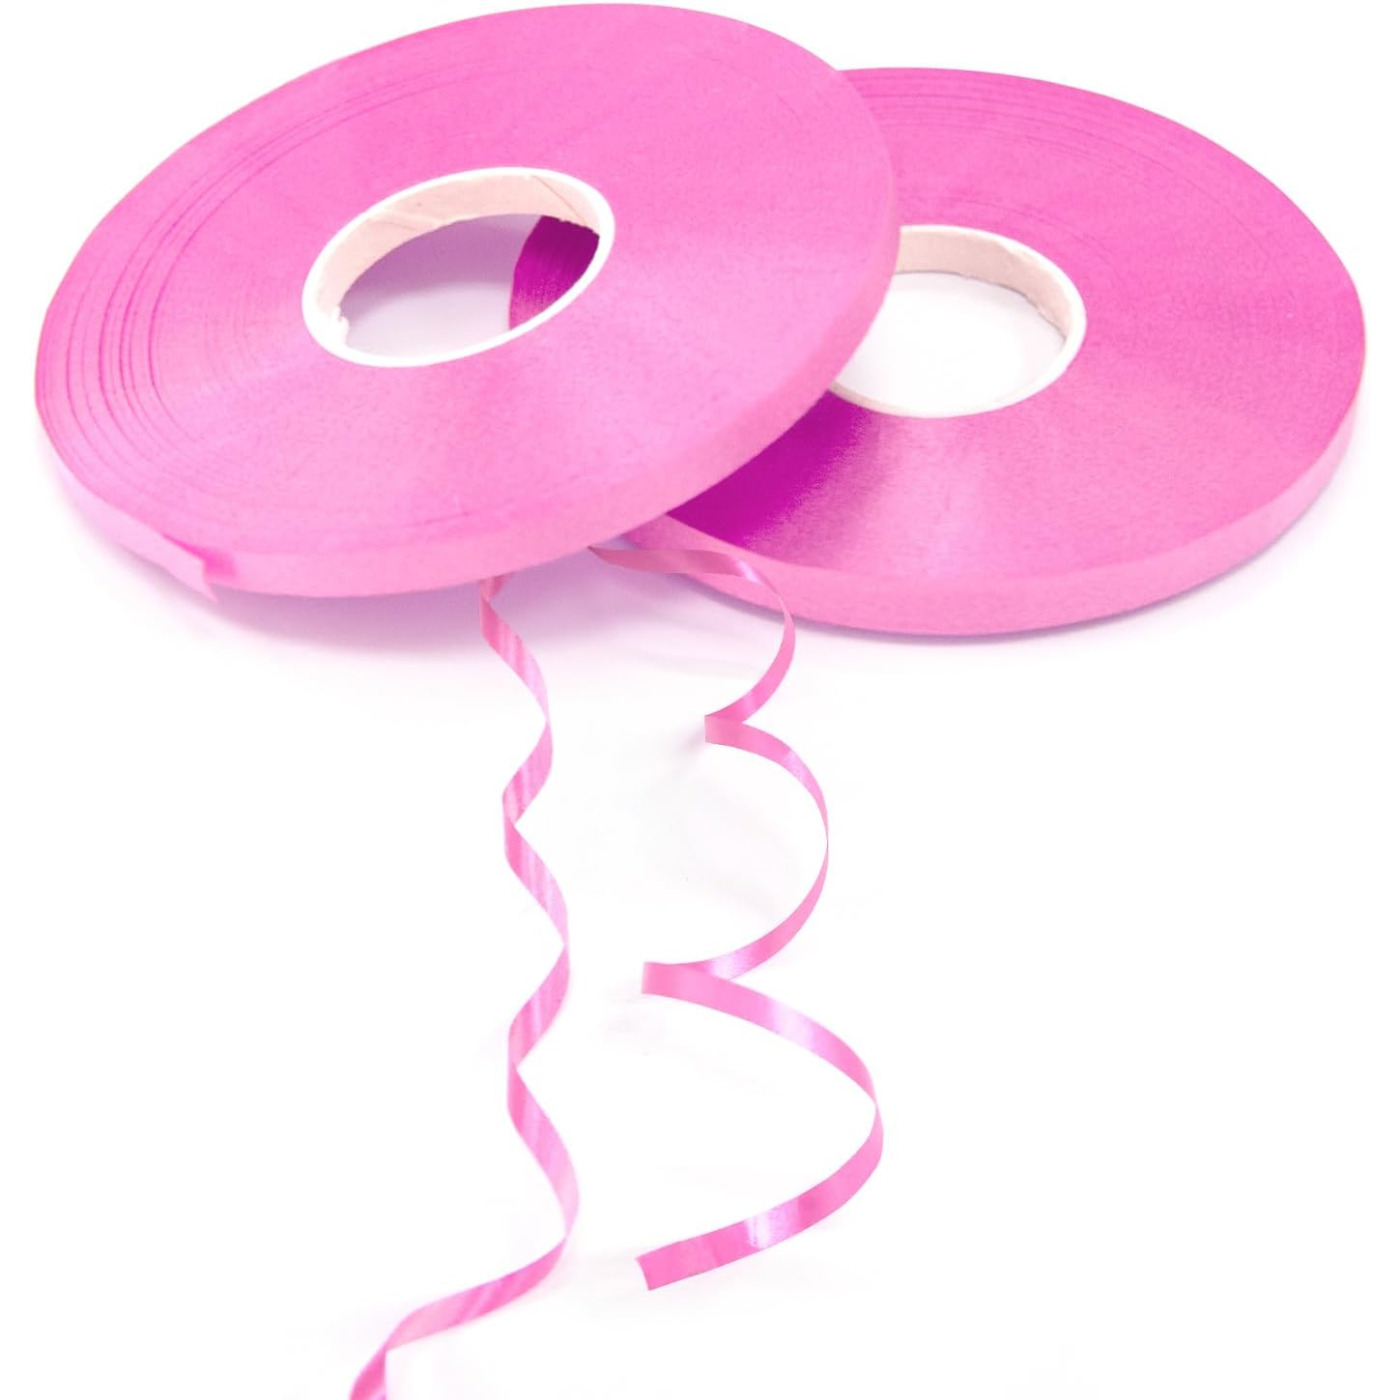 13mm Wide Dusky Pink Satin Ribbon 10 METER ROLL of Narrow Double